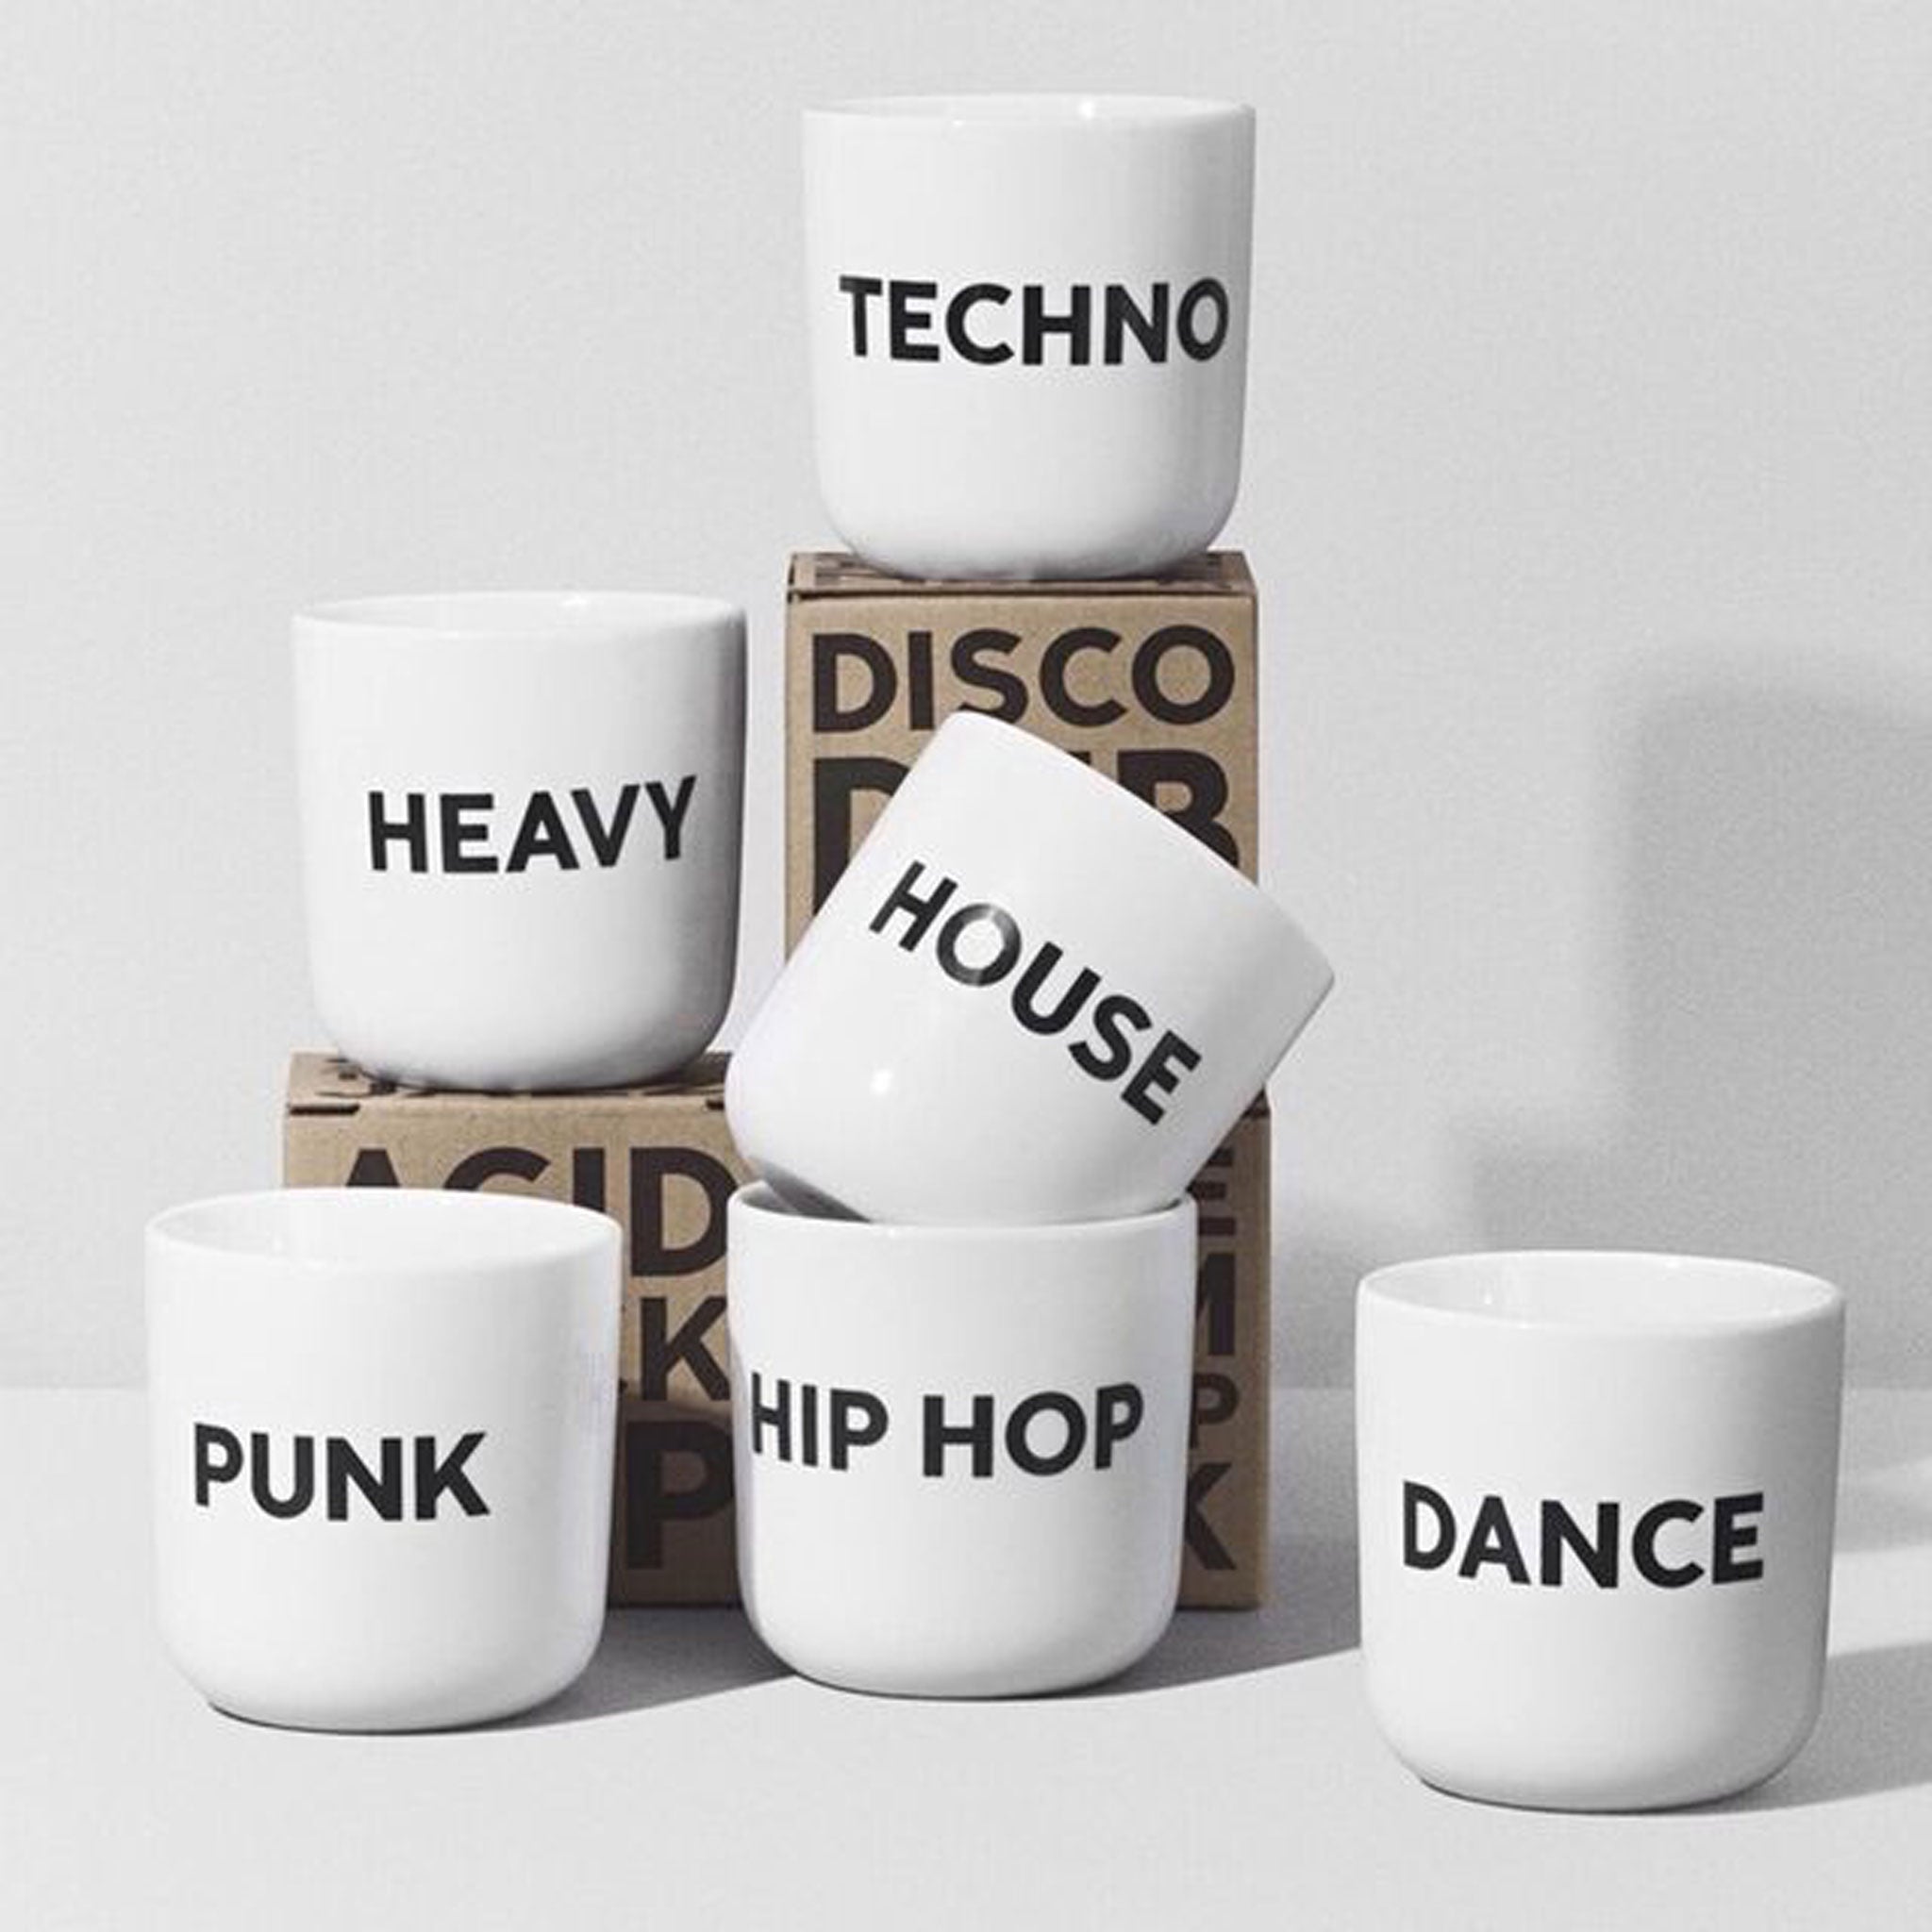 DANCE | white coffee & tea MUG with black typo | Beat Collection | PLTY